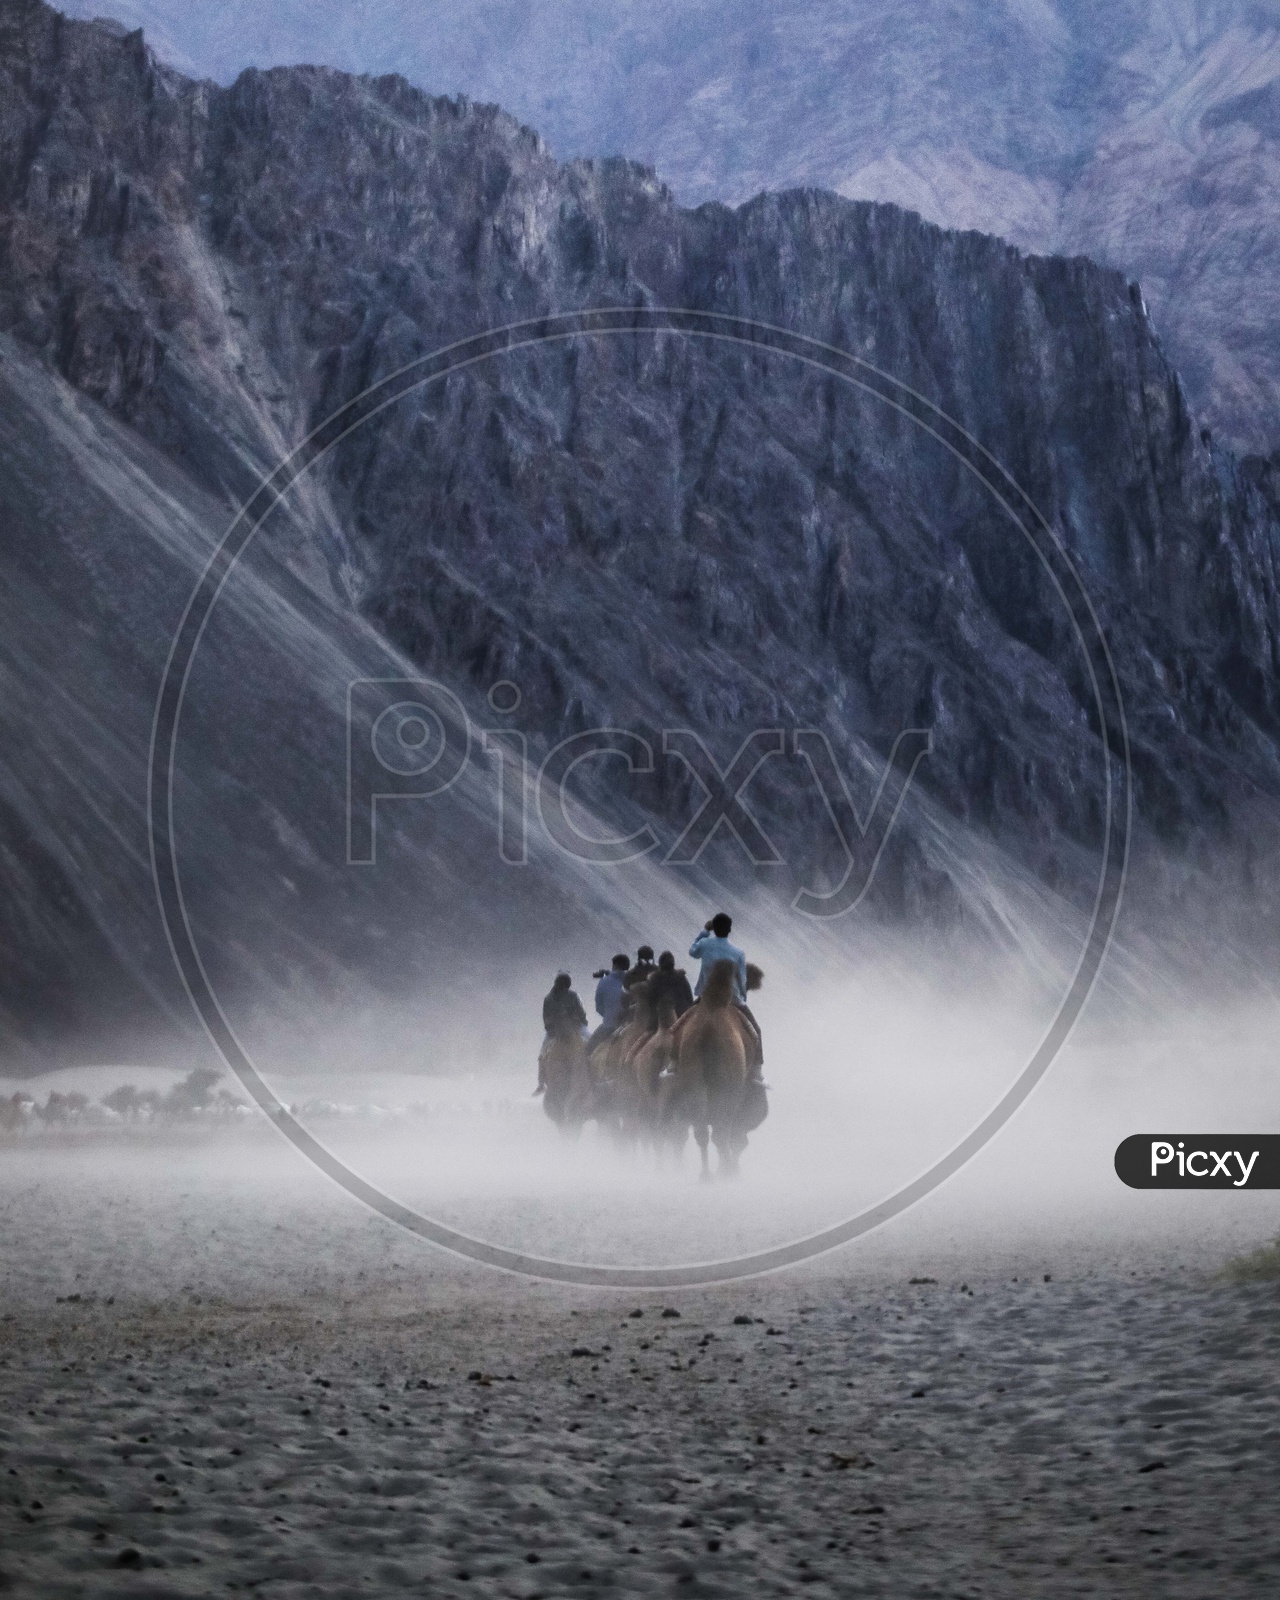 Tourists at Nubra Valley riding on Arabian Camels crossing Sand Dunes.